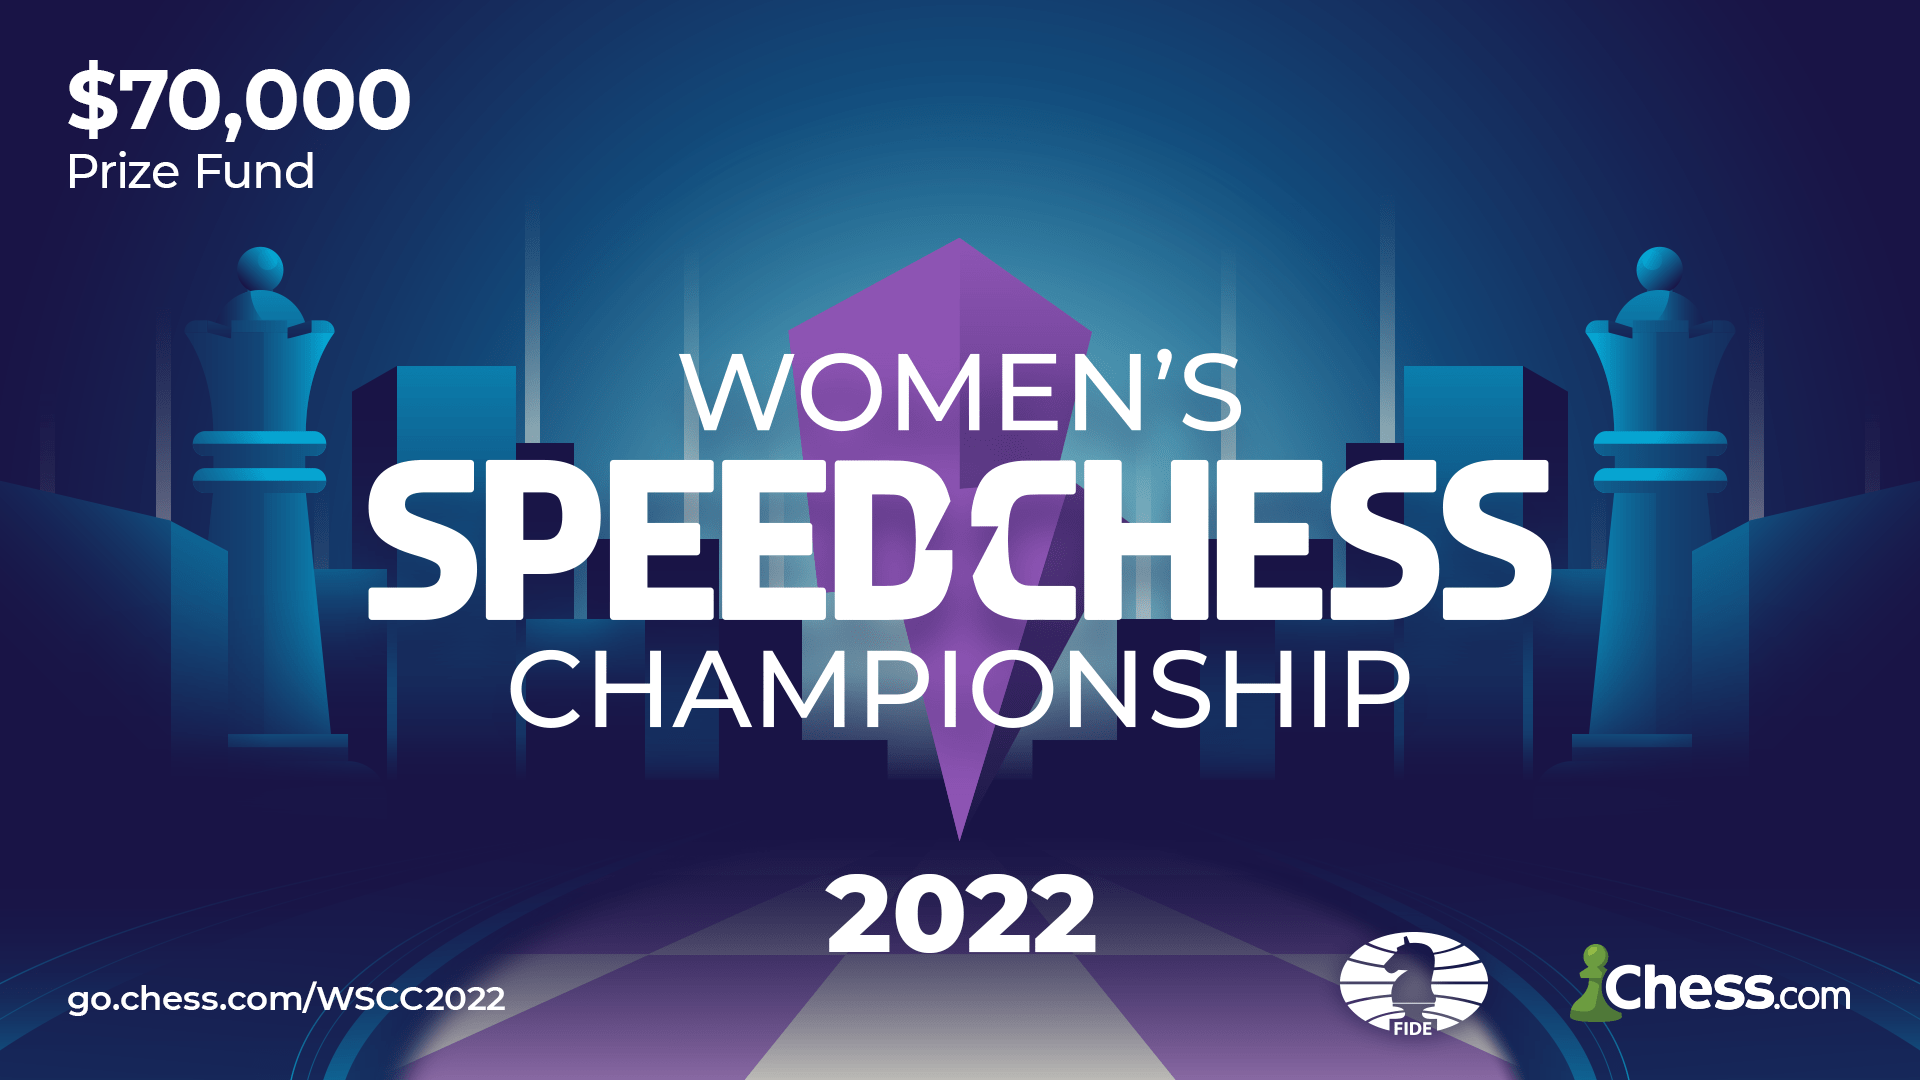 Your Chance To Predict the 2022 Women’s Speed Chess Championship Is Here!